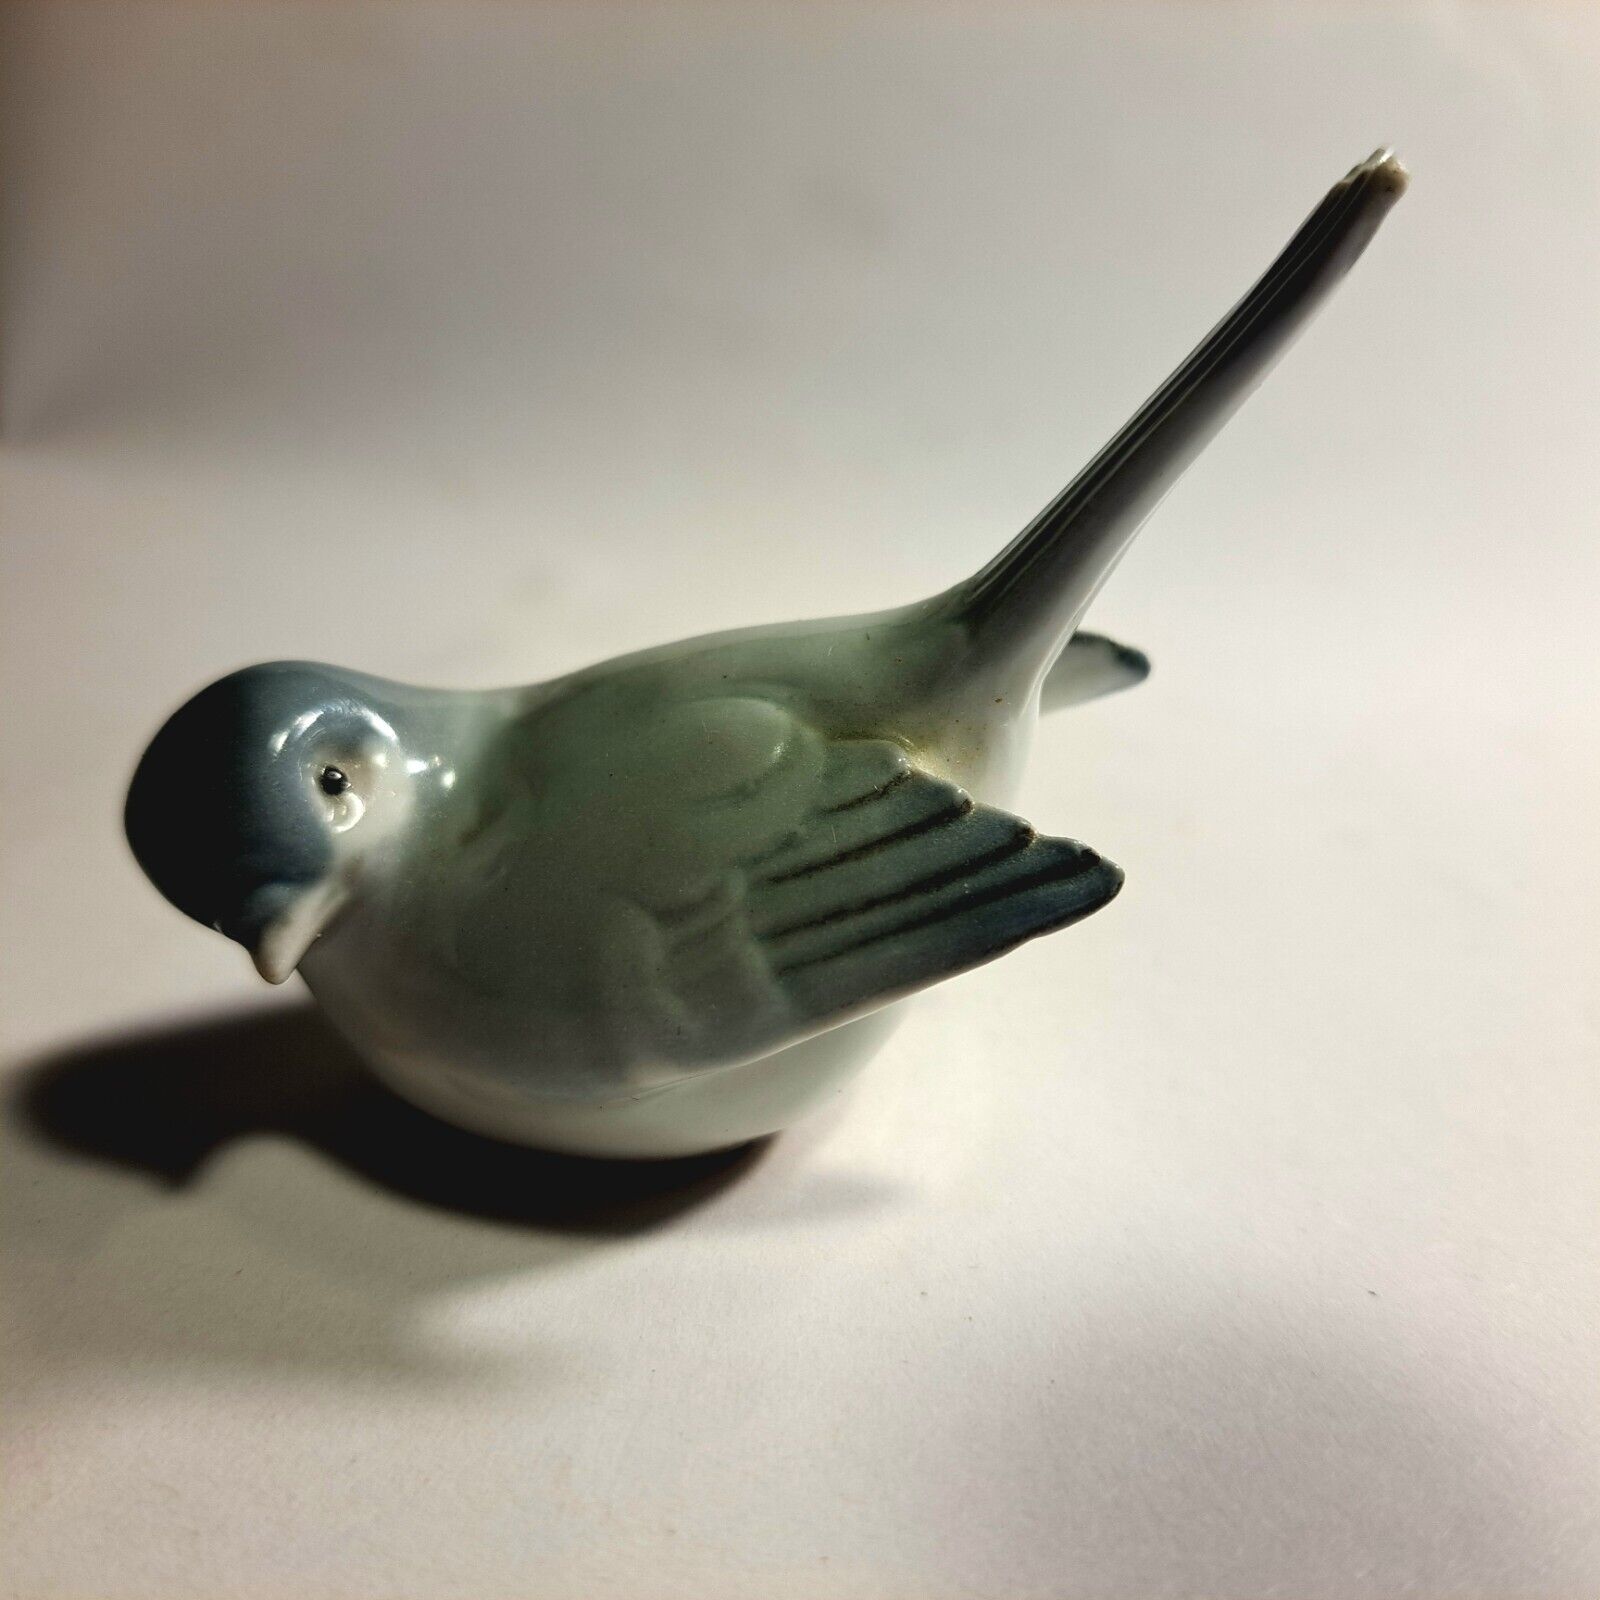 Sparrow Figurine, Uniquely Detailed Wings, Vintage, Glazed Marked 1959 On Bottom